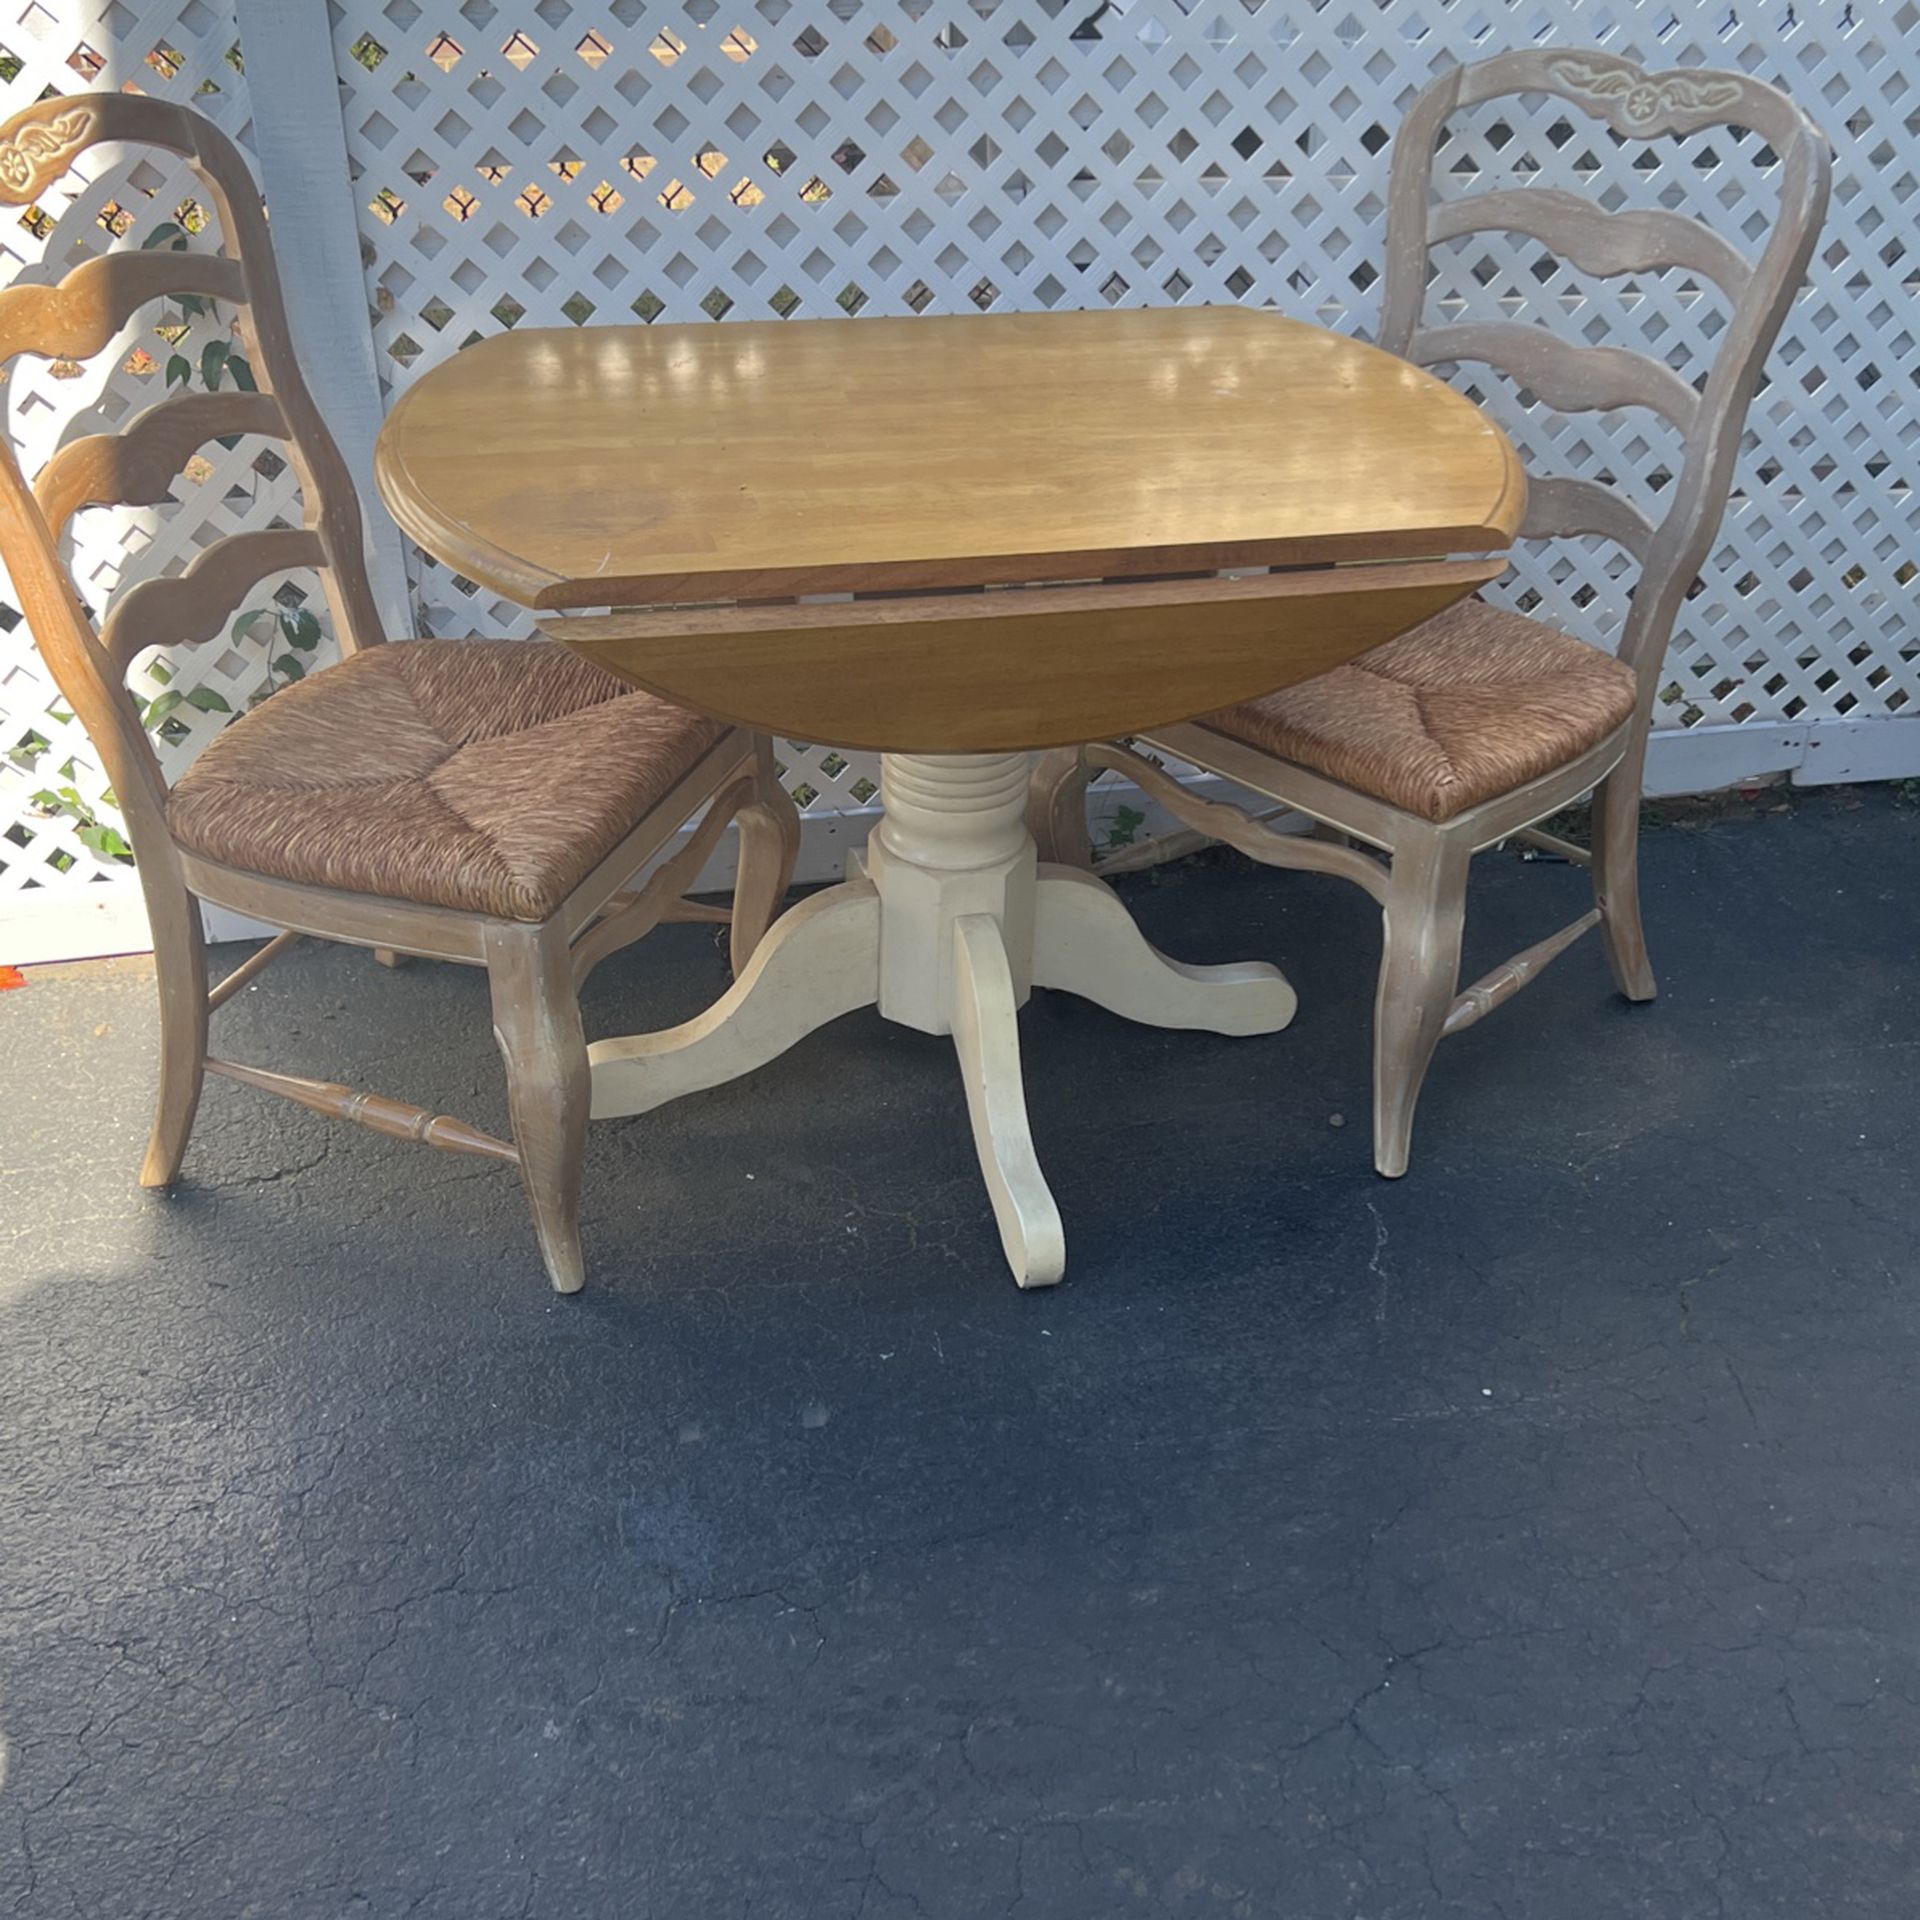 Butcher Block Pedestal Table & 2 Ladder Back Chairs With Straw Seats 42”round Open & 26” Closed & 29” Tall 